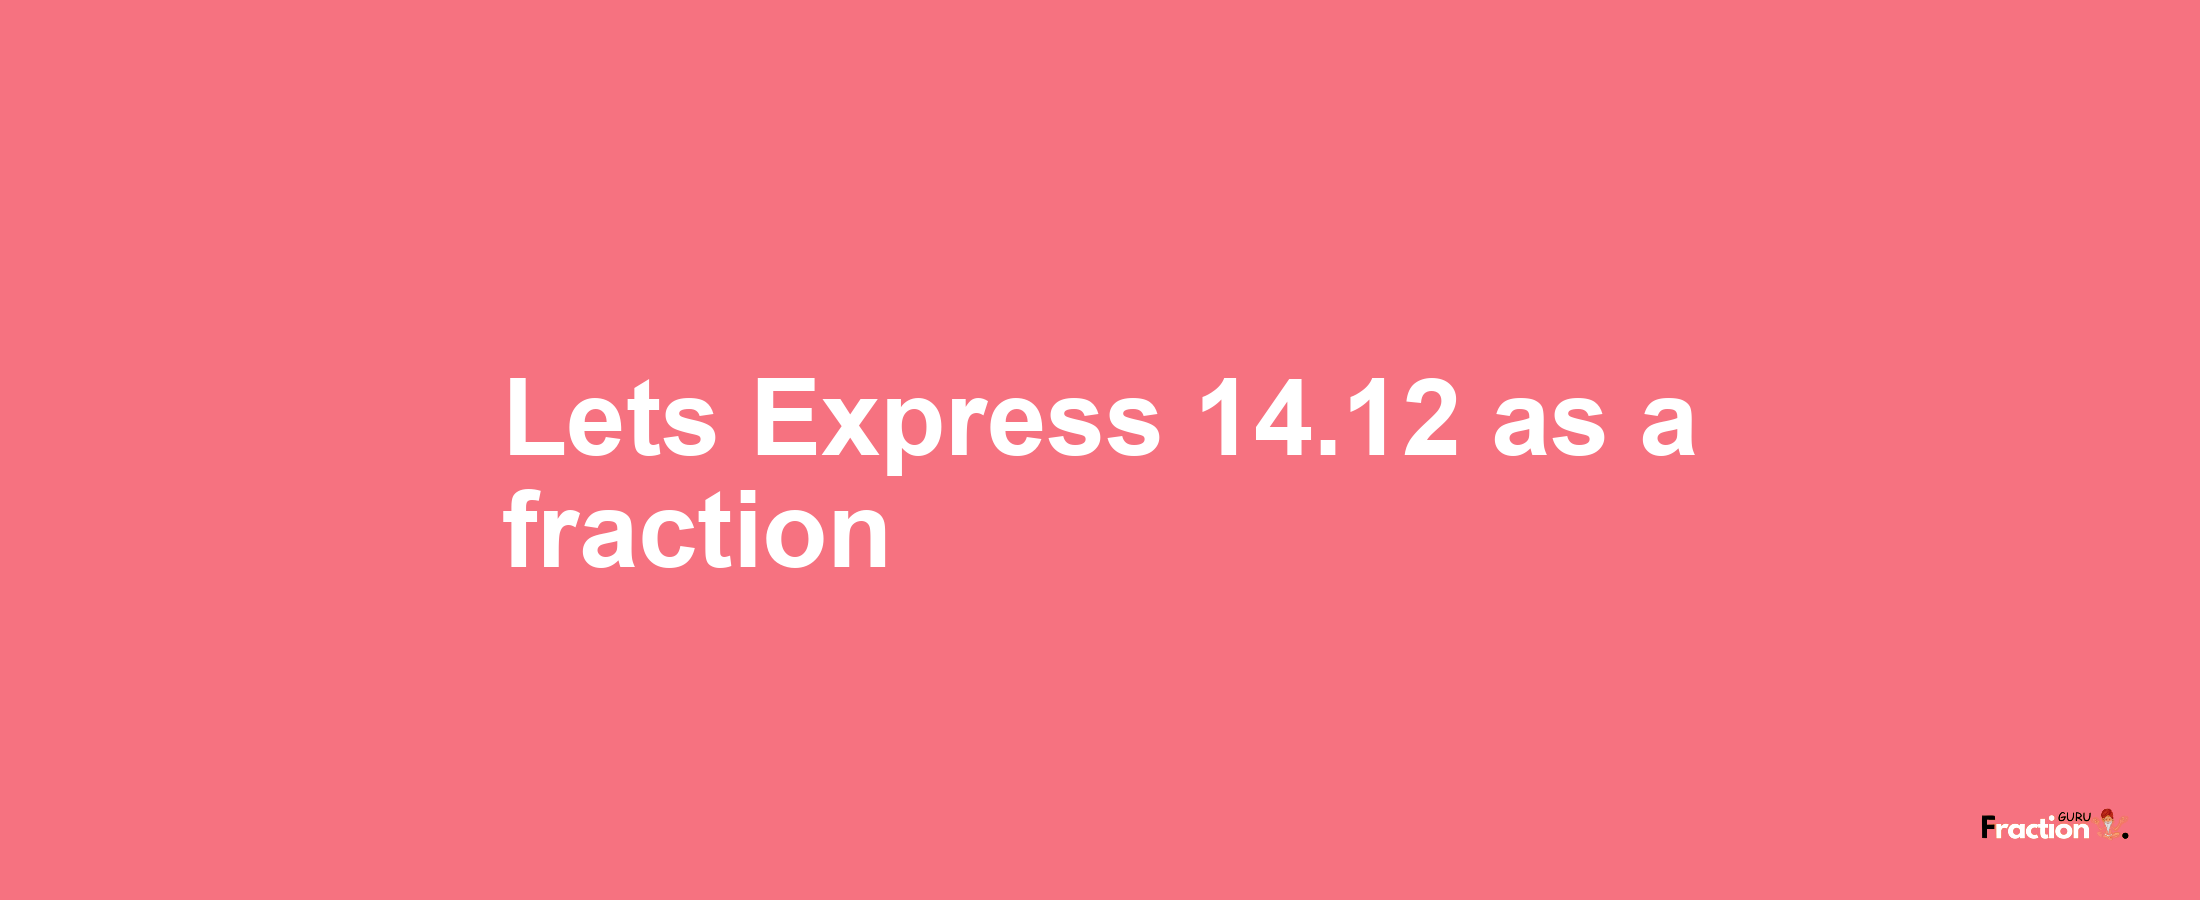 Lets Express 14.12 as afraction